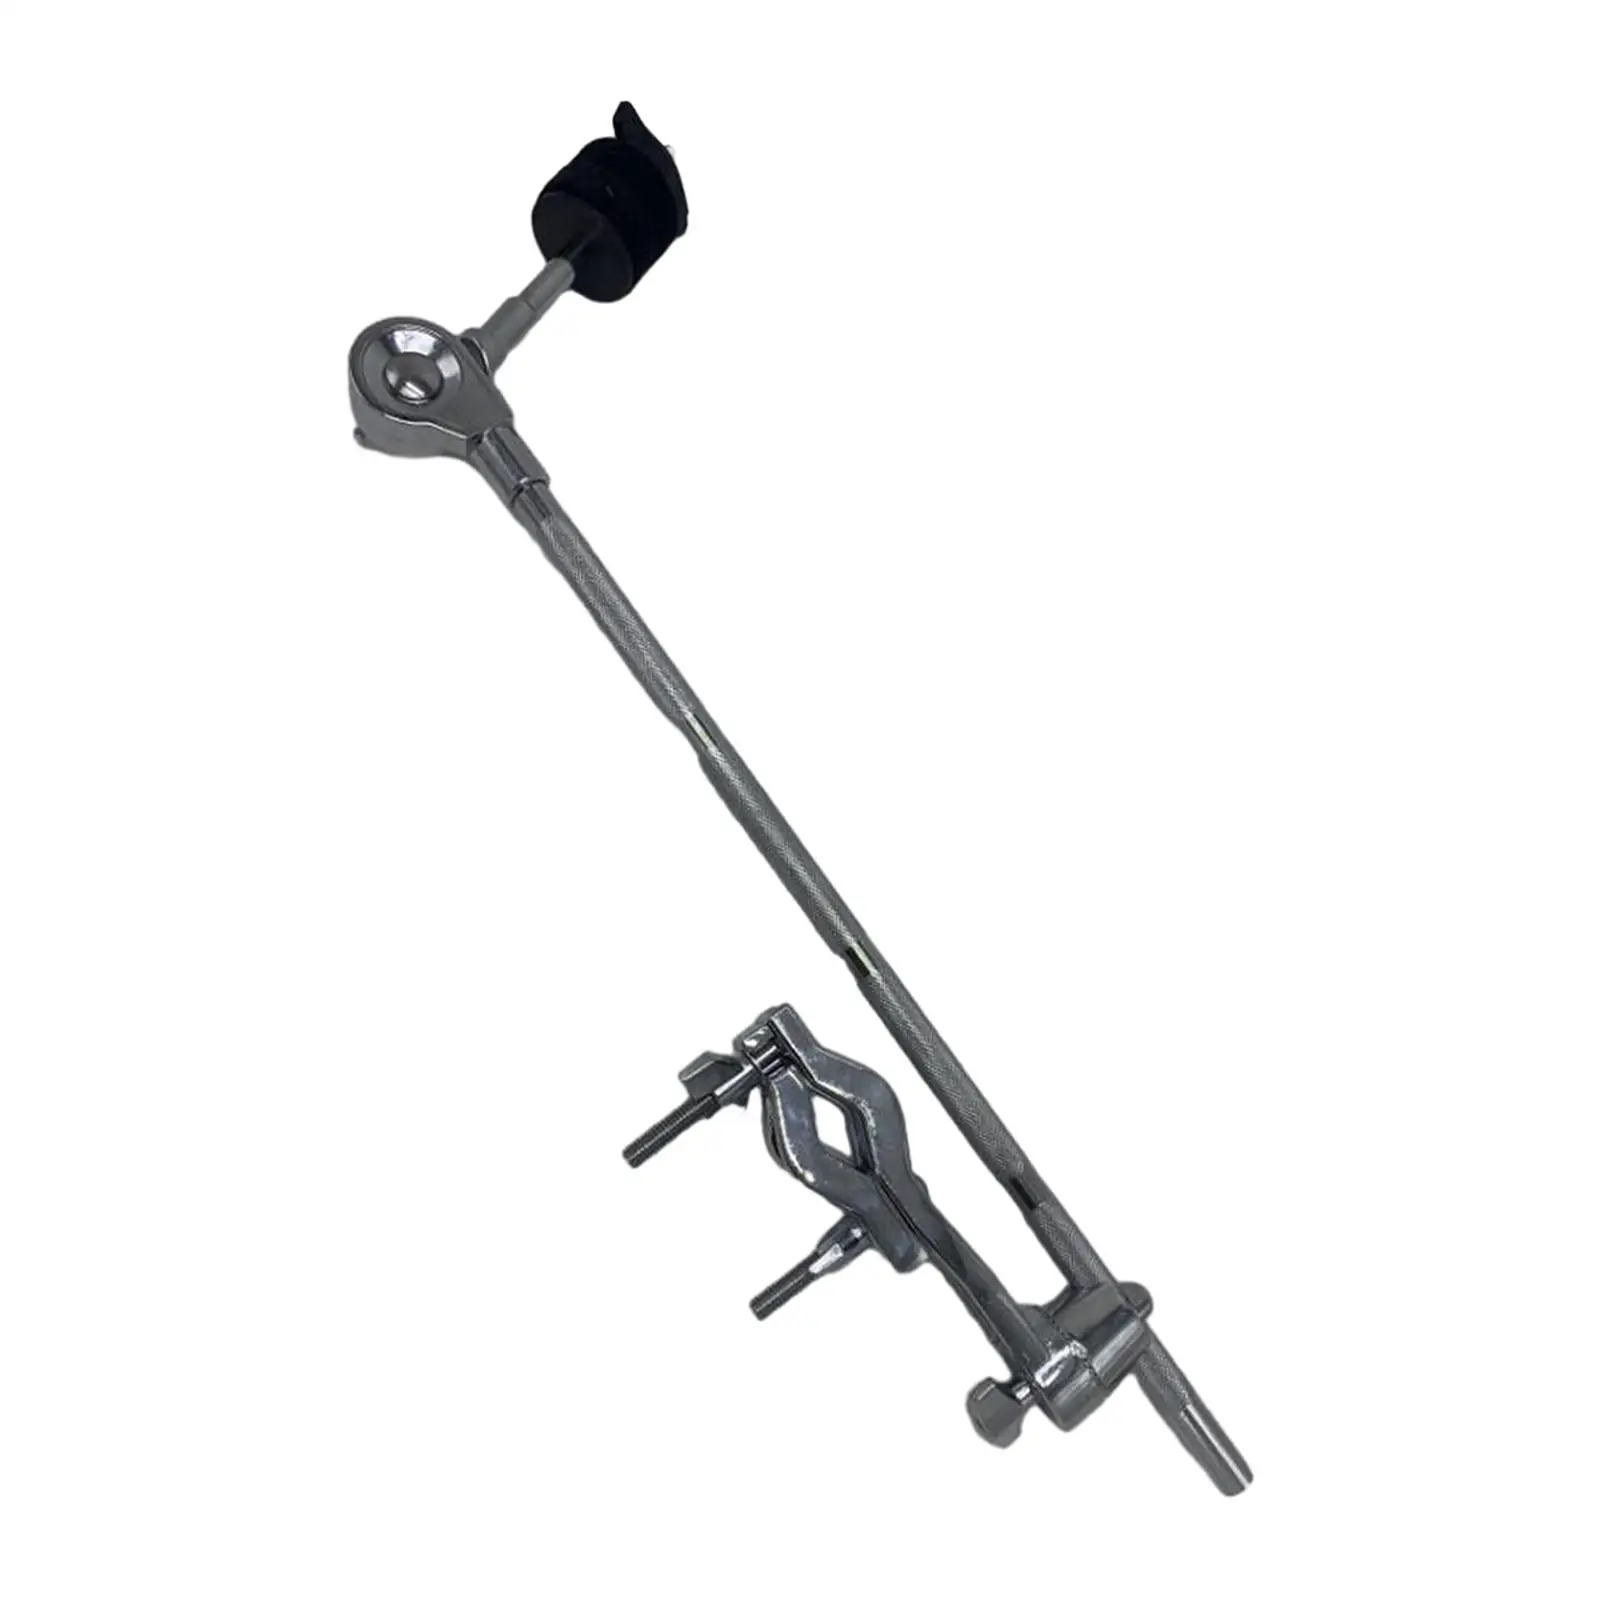 Cymbal Arm with Clamp Easily Carry Portable Support Rod Cymbal Arm Extension Arm for Musical Instrument Accessory